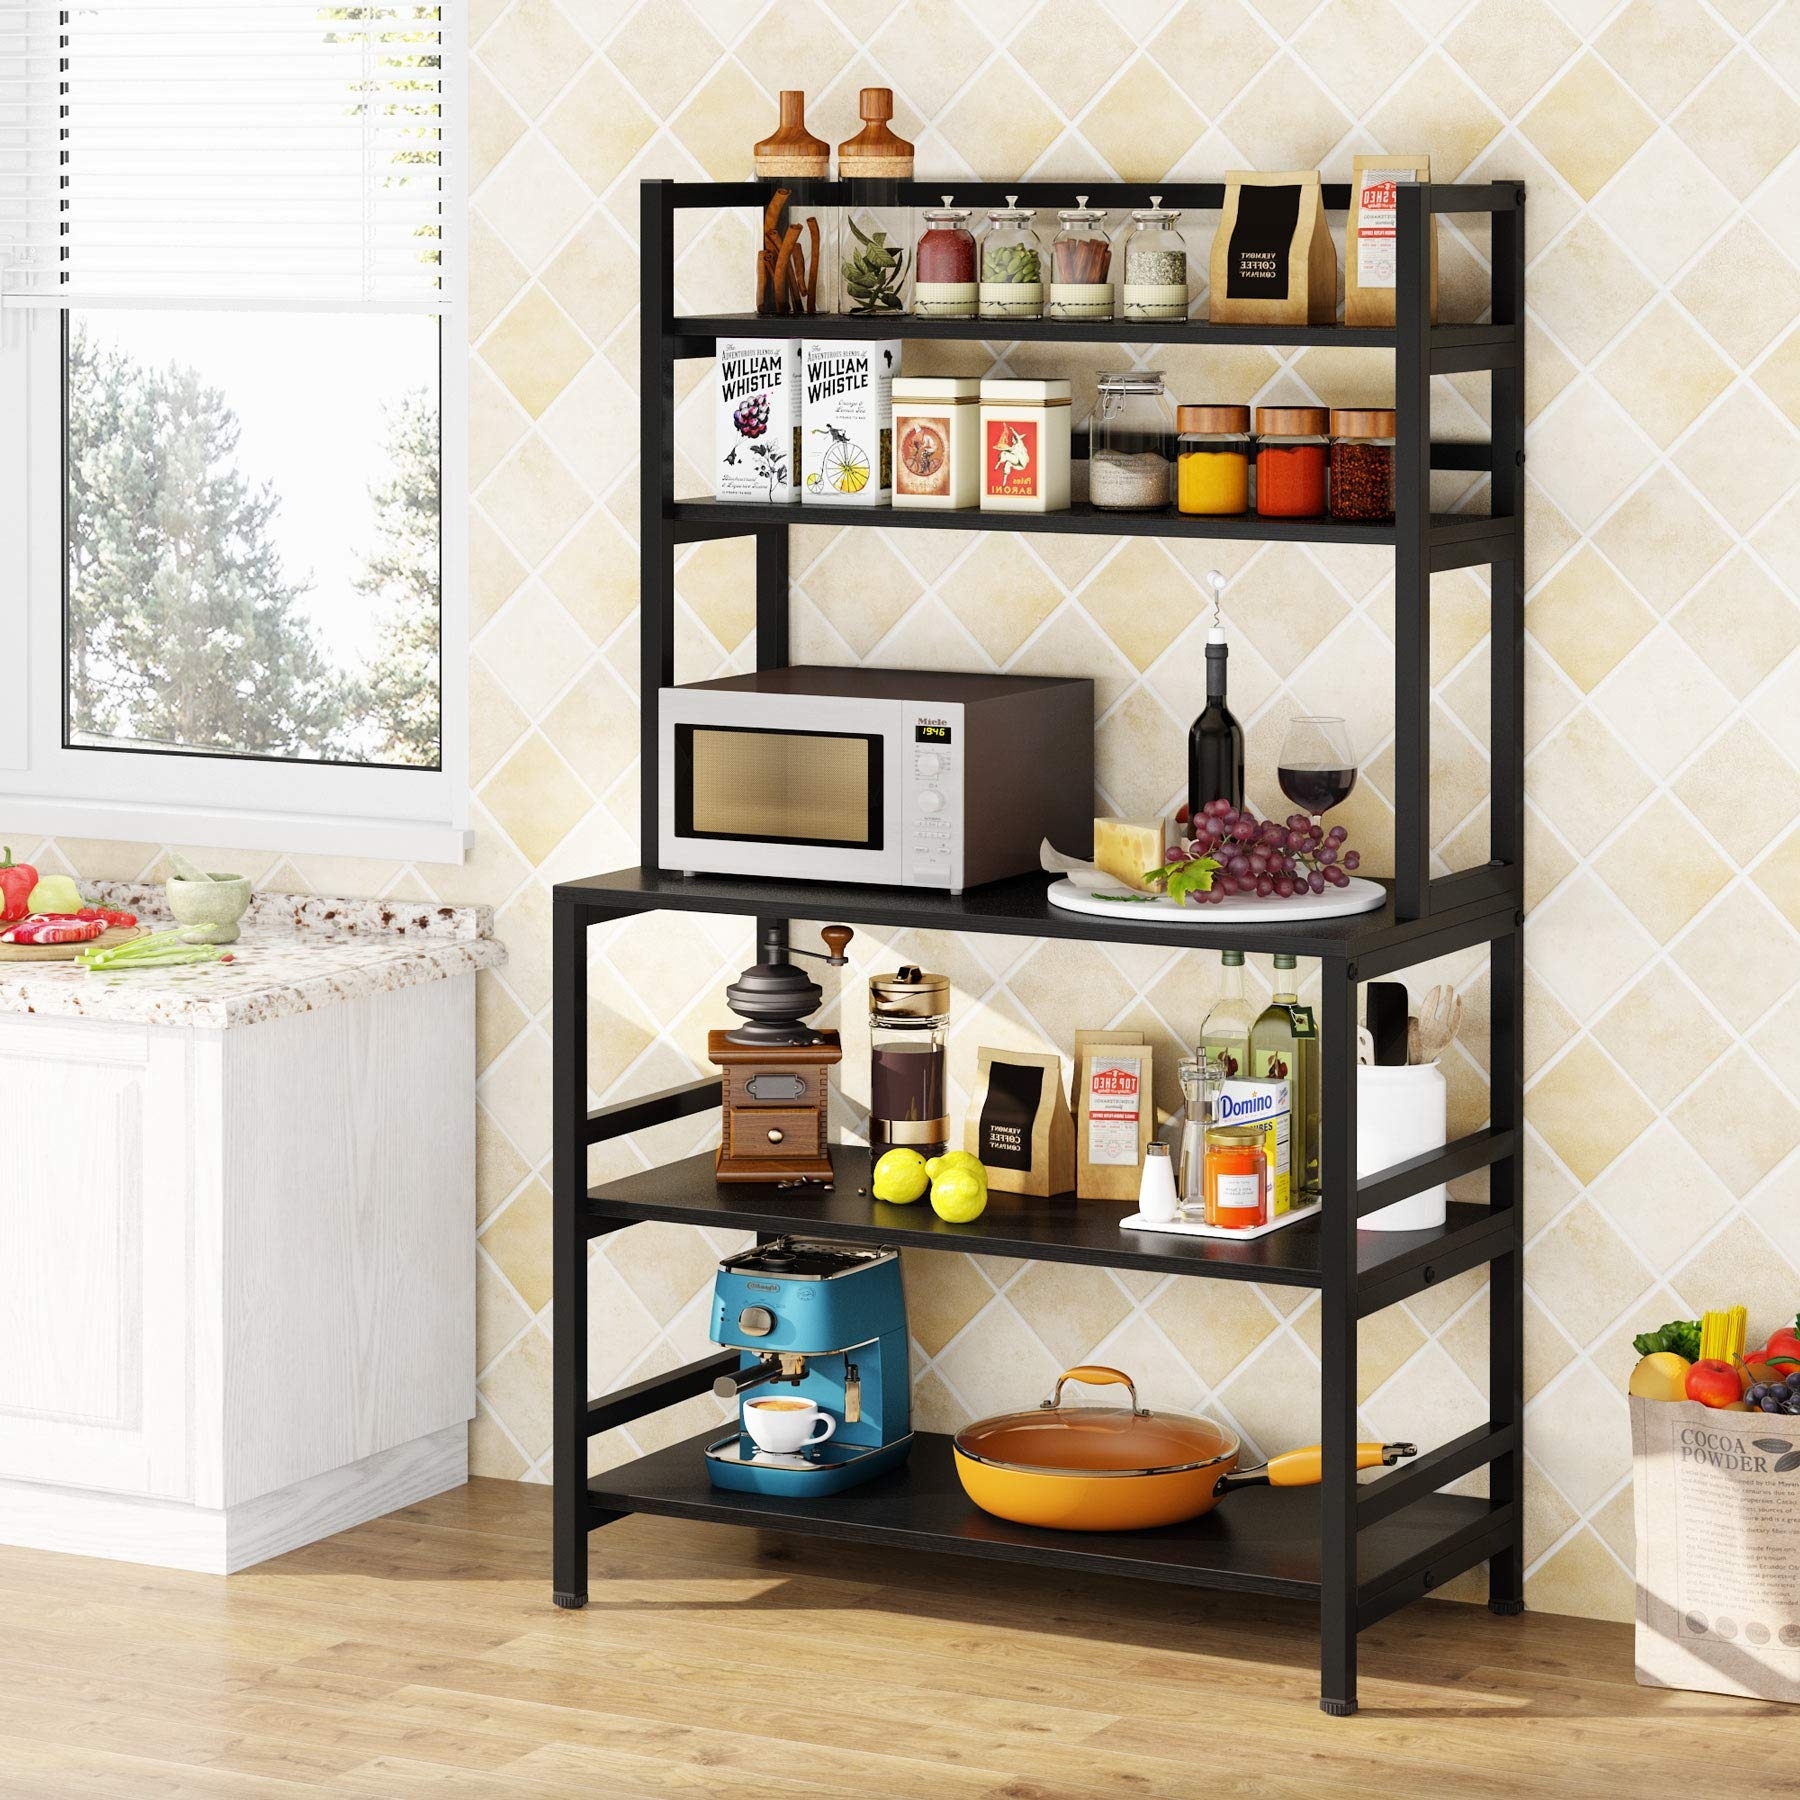 https://ak1.ostkcdn.com/images/products/is/images/direct/86097aed3d85d5f5d37d3ee454ffdea8ddd157d9/5-Tier-Kitchen-Bakers-Rack-Kitchen-Stand-Utility-Storage-Cart.jpg